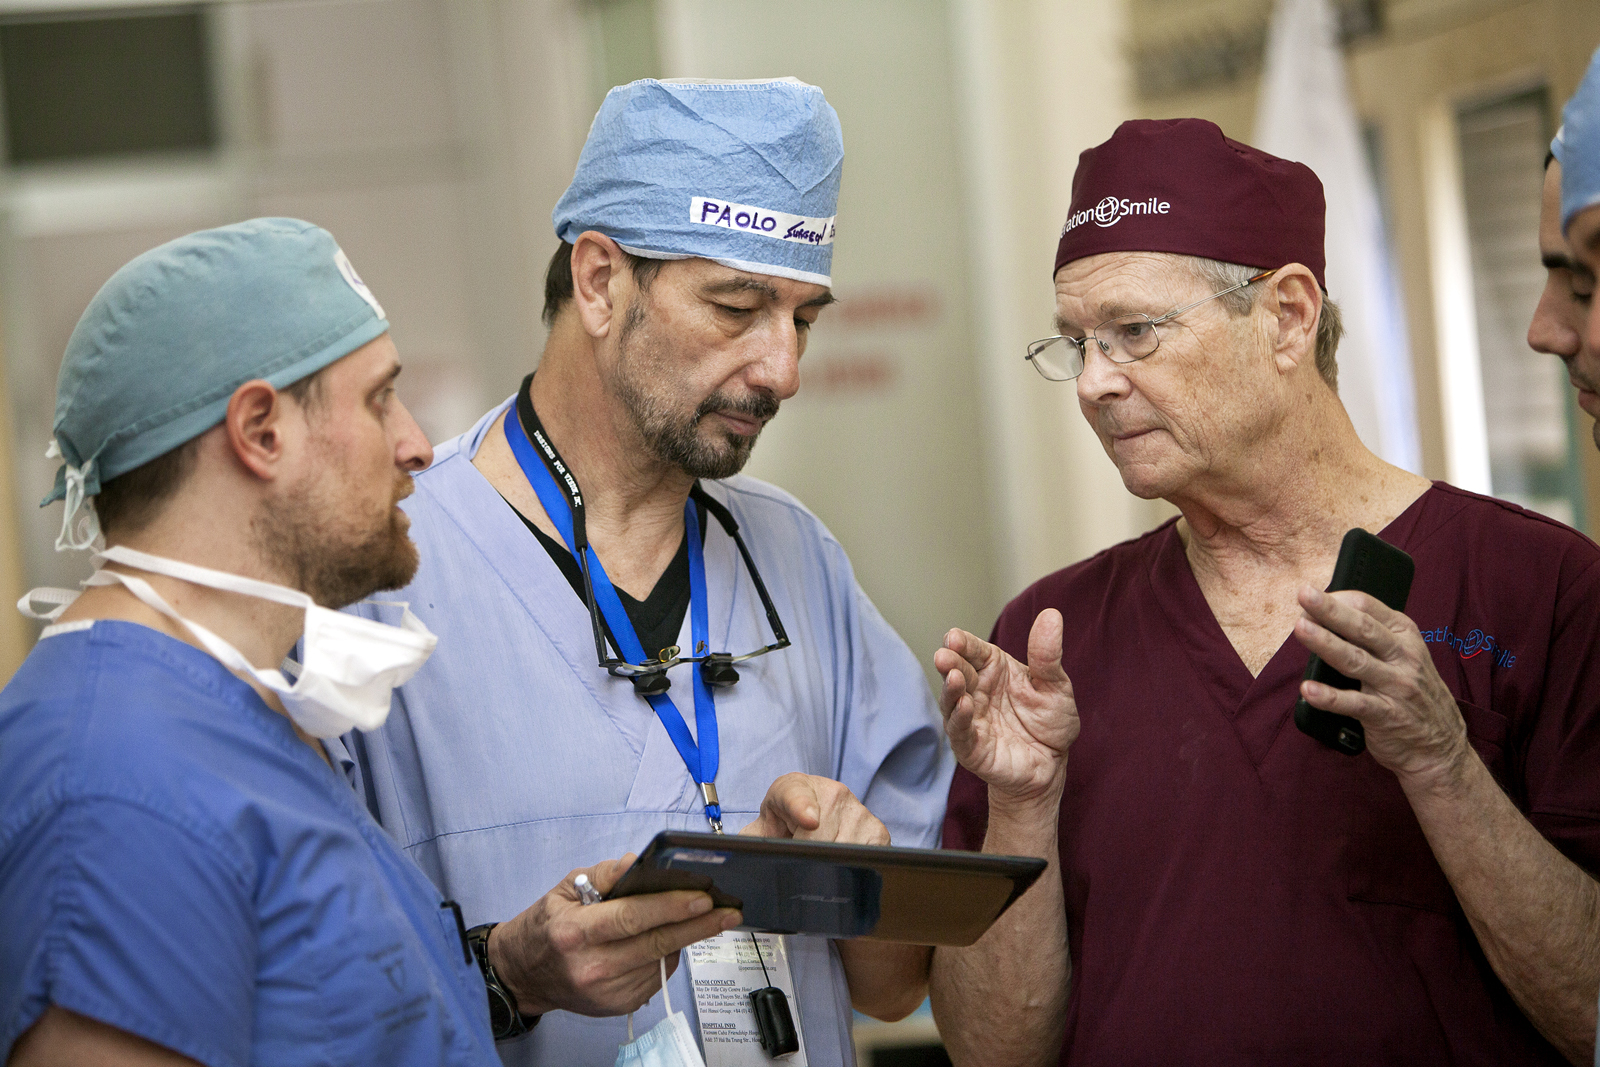 Medical volunteers and Operation Smile Founder Dr. Bill Magee